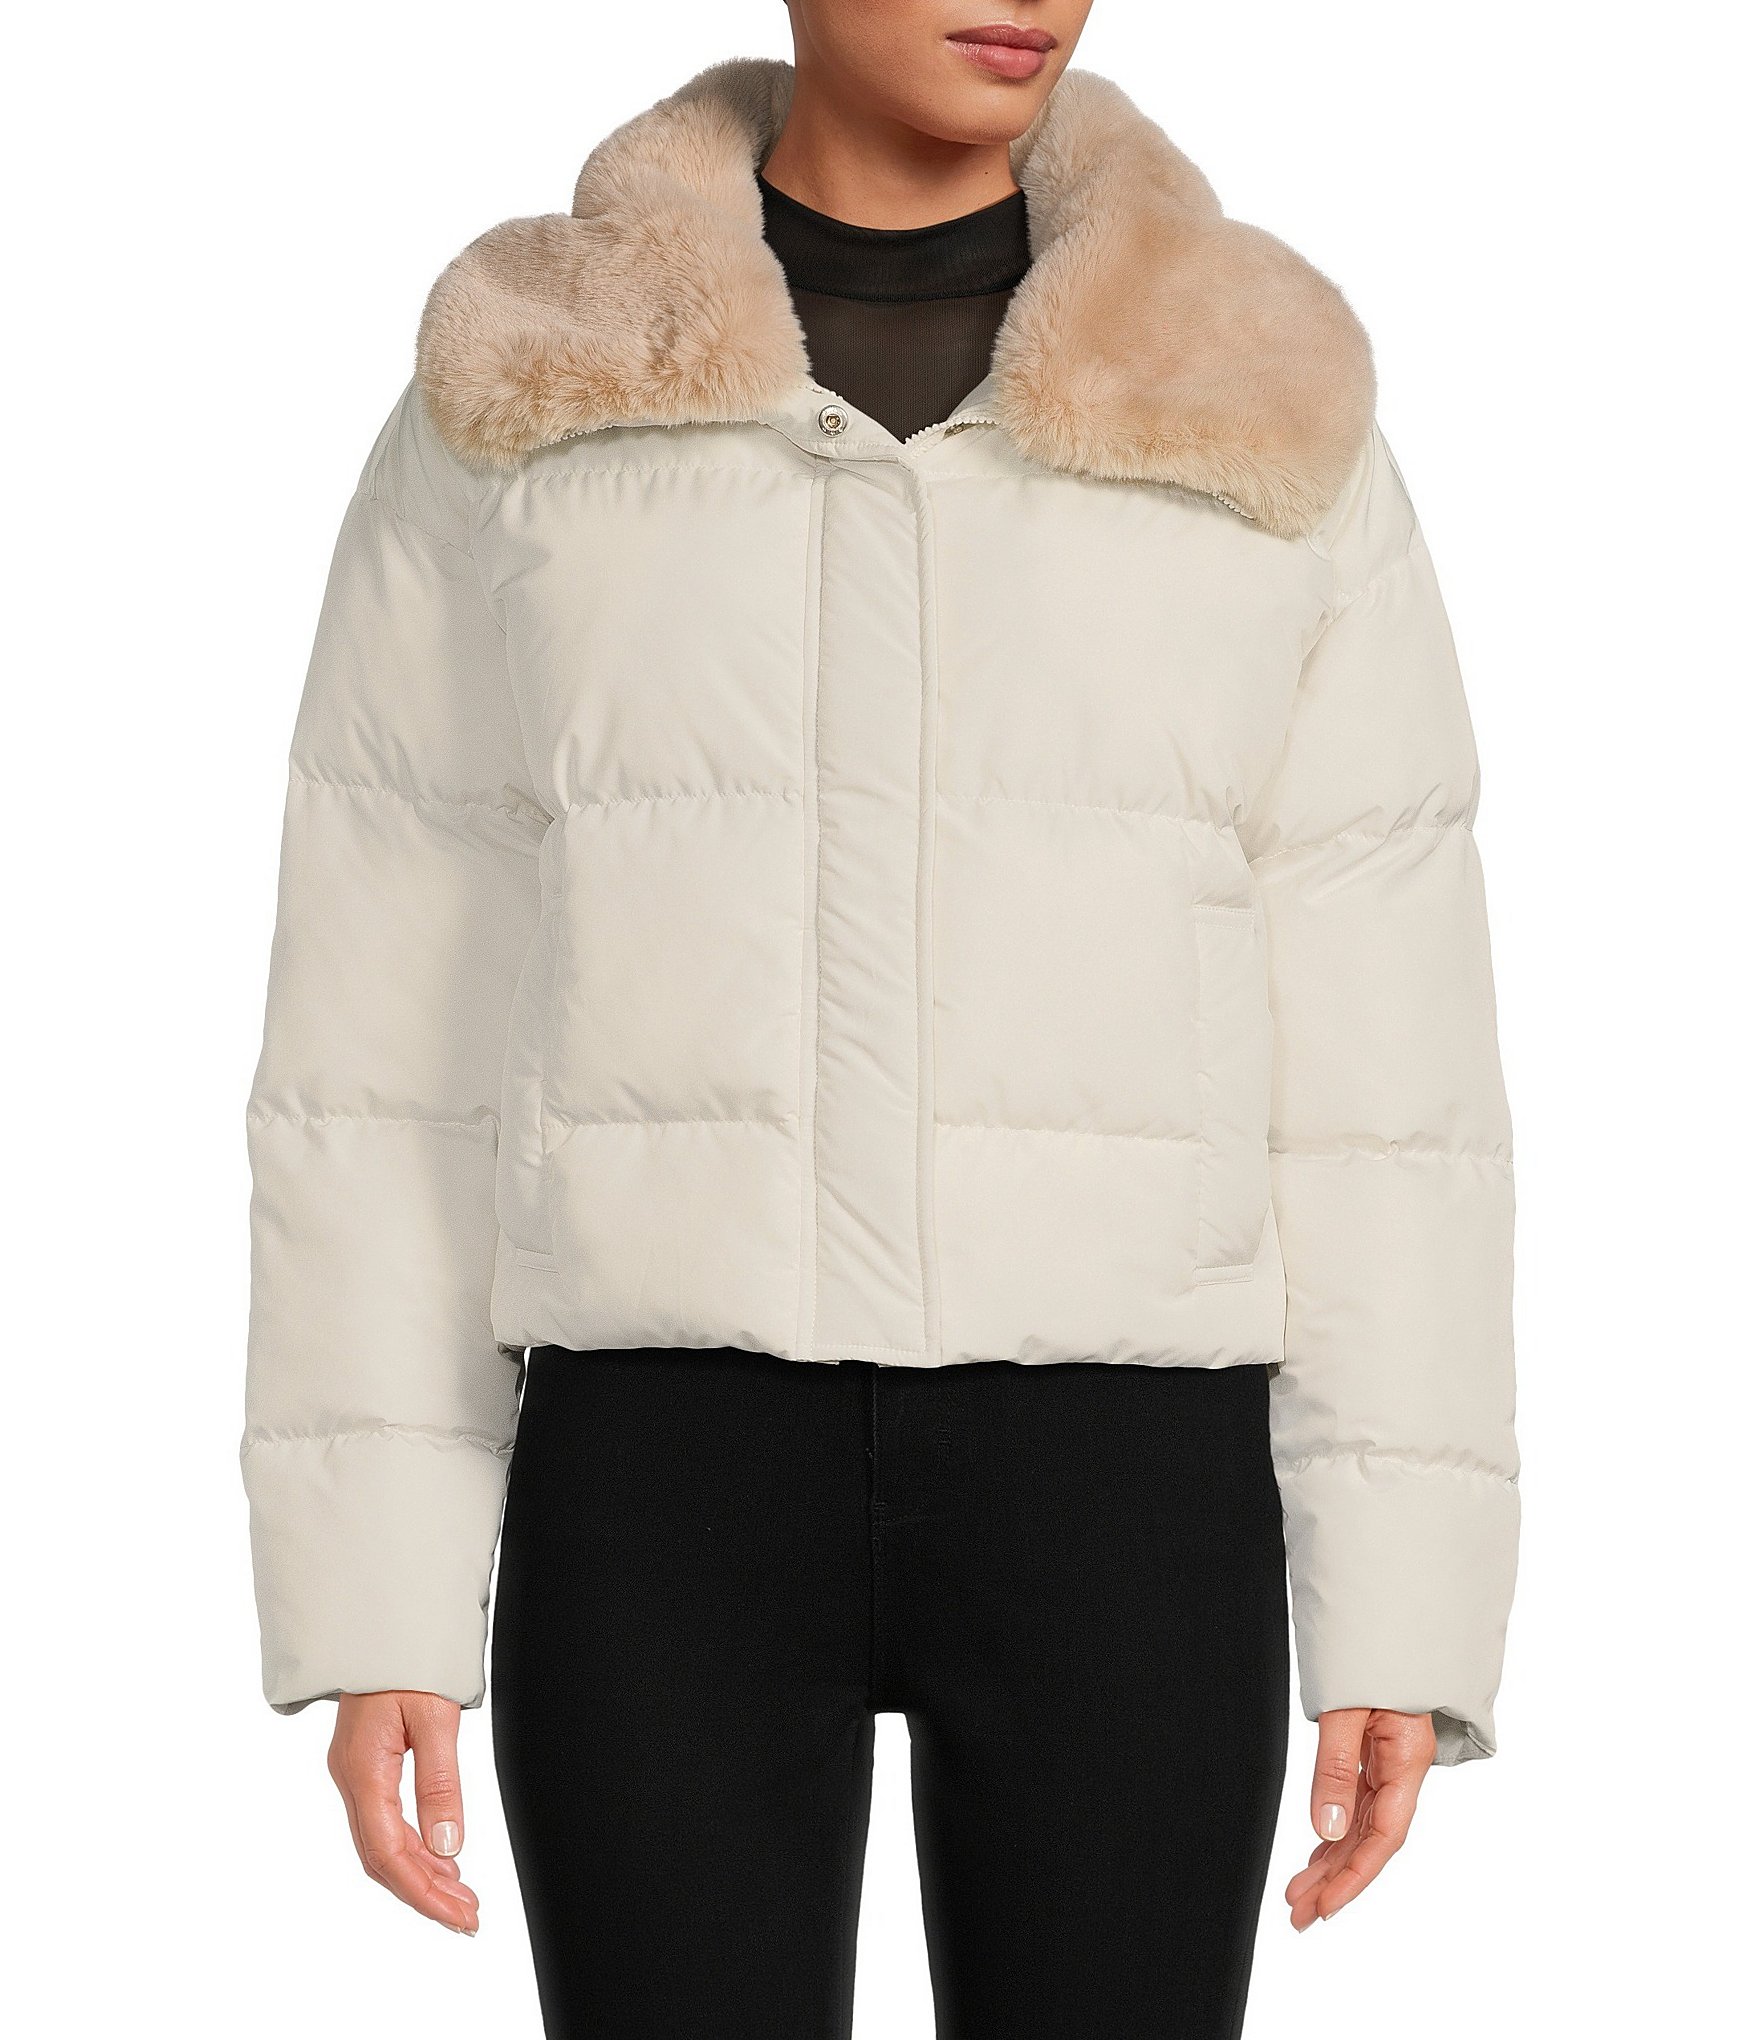 GB Signature Cropped Puffer Jacket